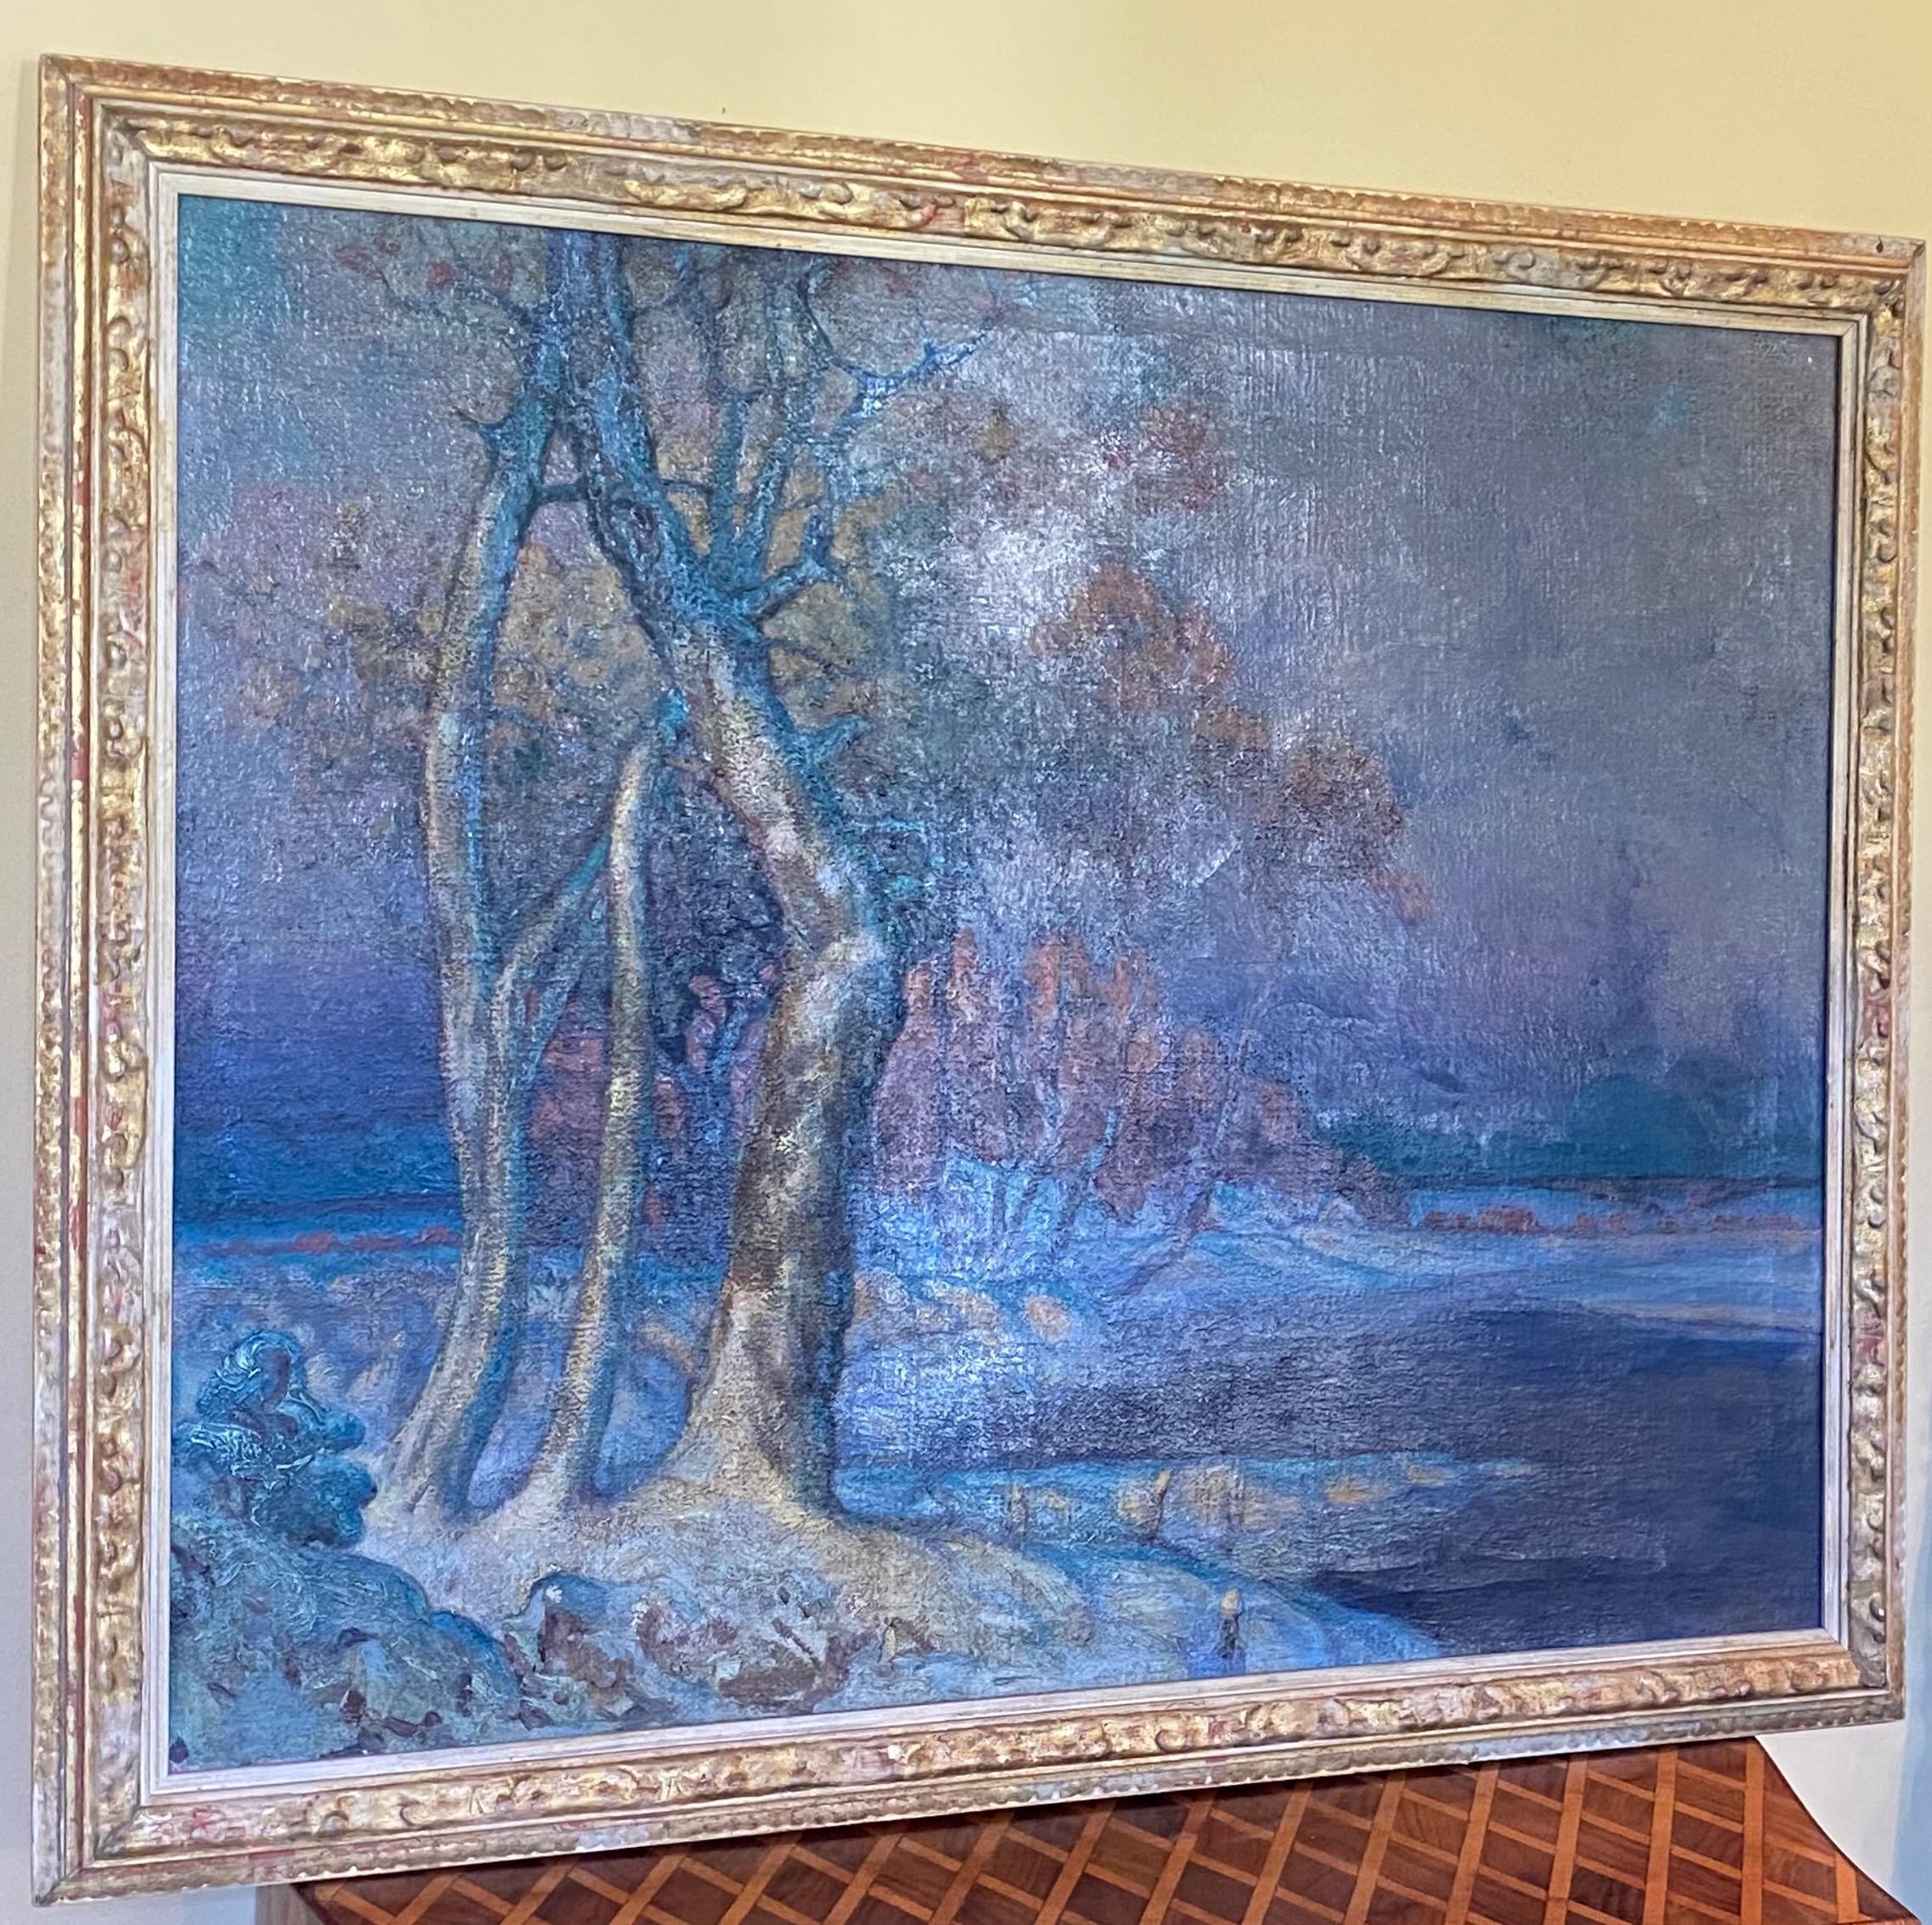 Large nocturnal winter landscape painting by California artist Peter ILYIN.
Framed oil on canvas titled 'First Snow'. This painting hung in the Bohemian Club in San Francisco, and retains original artist label and info on the back.
Early 20th